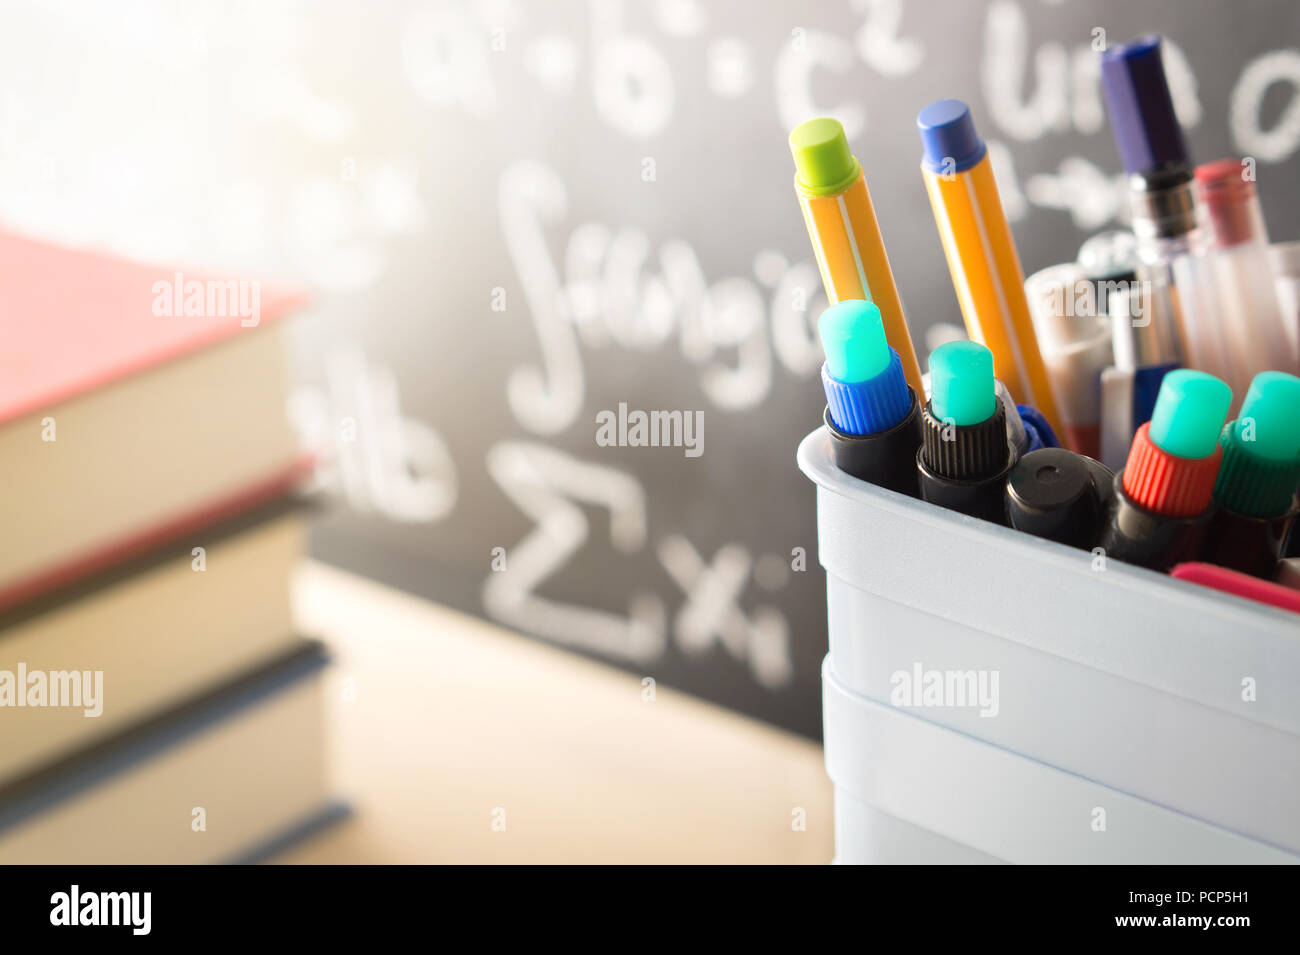 Pen holder and books in front of blackboard in classroom. Education, learning, teaching and knowledge concept. Classroom with chalkboard. Stock Photo